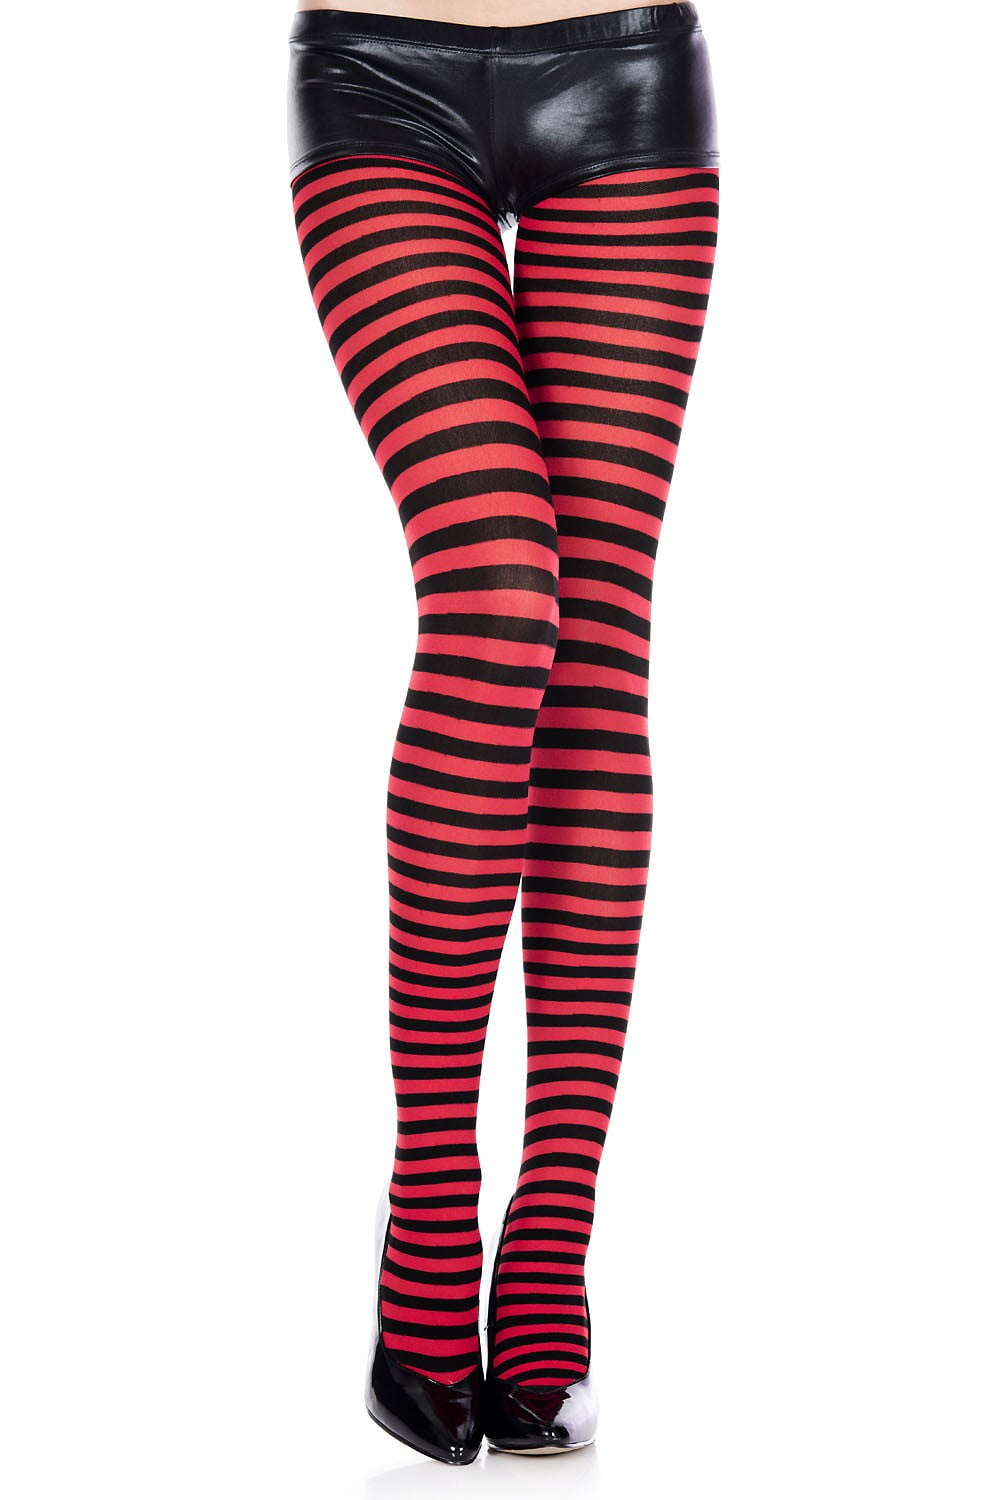 Black Vertical Stripe Tights made in Italy One Size 36 to 42 Hip